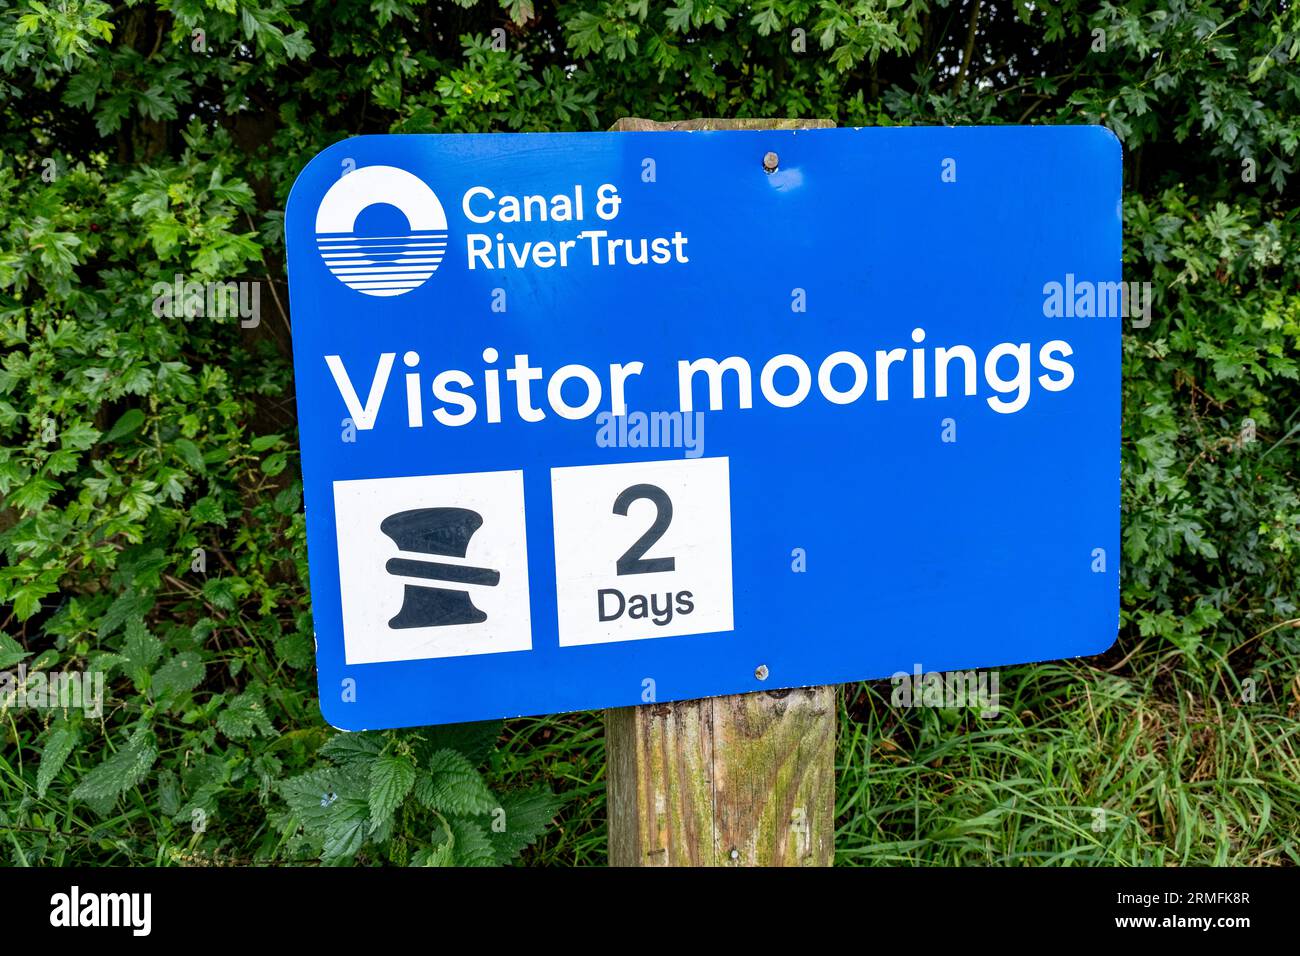 Canal & River Trust sign, 2 days visitor moorings in Wheelock near Sandbach Cheshire UK Stock Photo